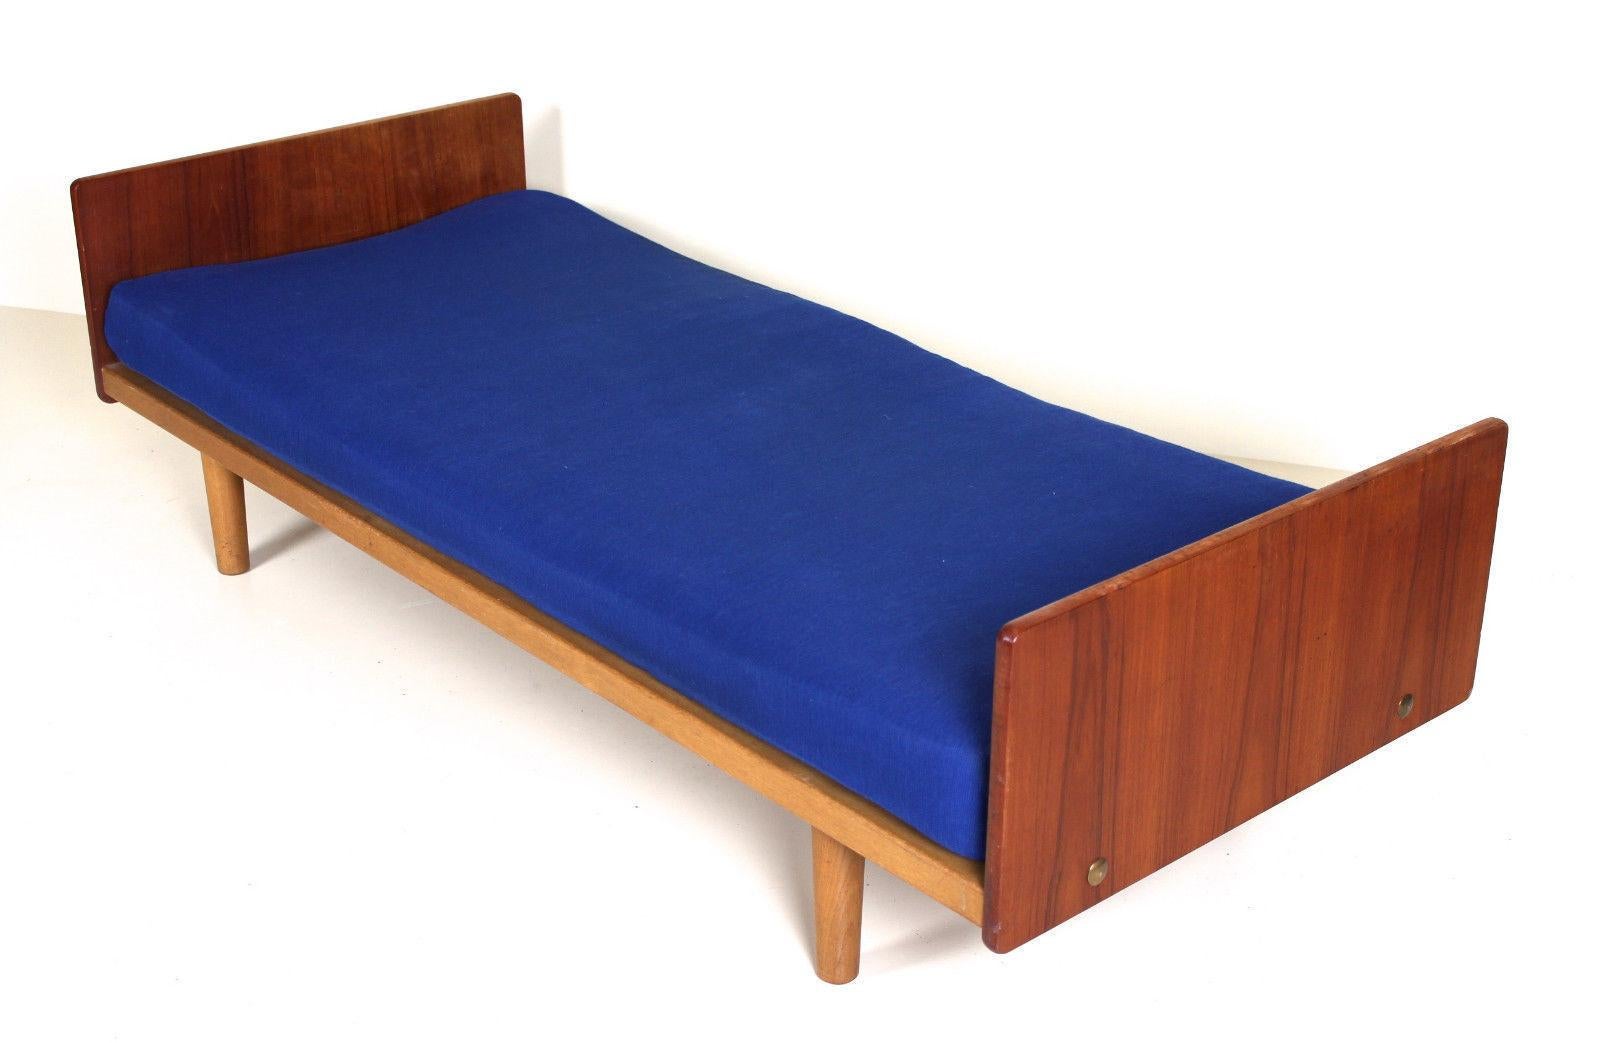 A rare opportunity to acquire a Danish mid-20th century day bed.

The cushion upholstered in blue material and framed with teak and raised on light oak round tapered legs.

Complete with storage drawer.